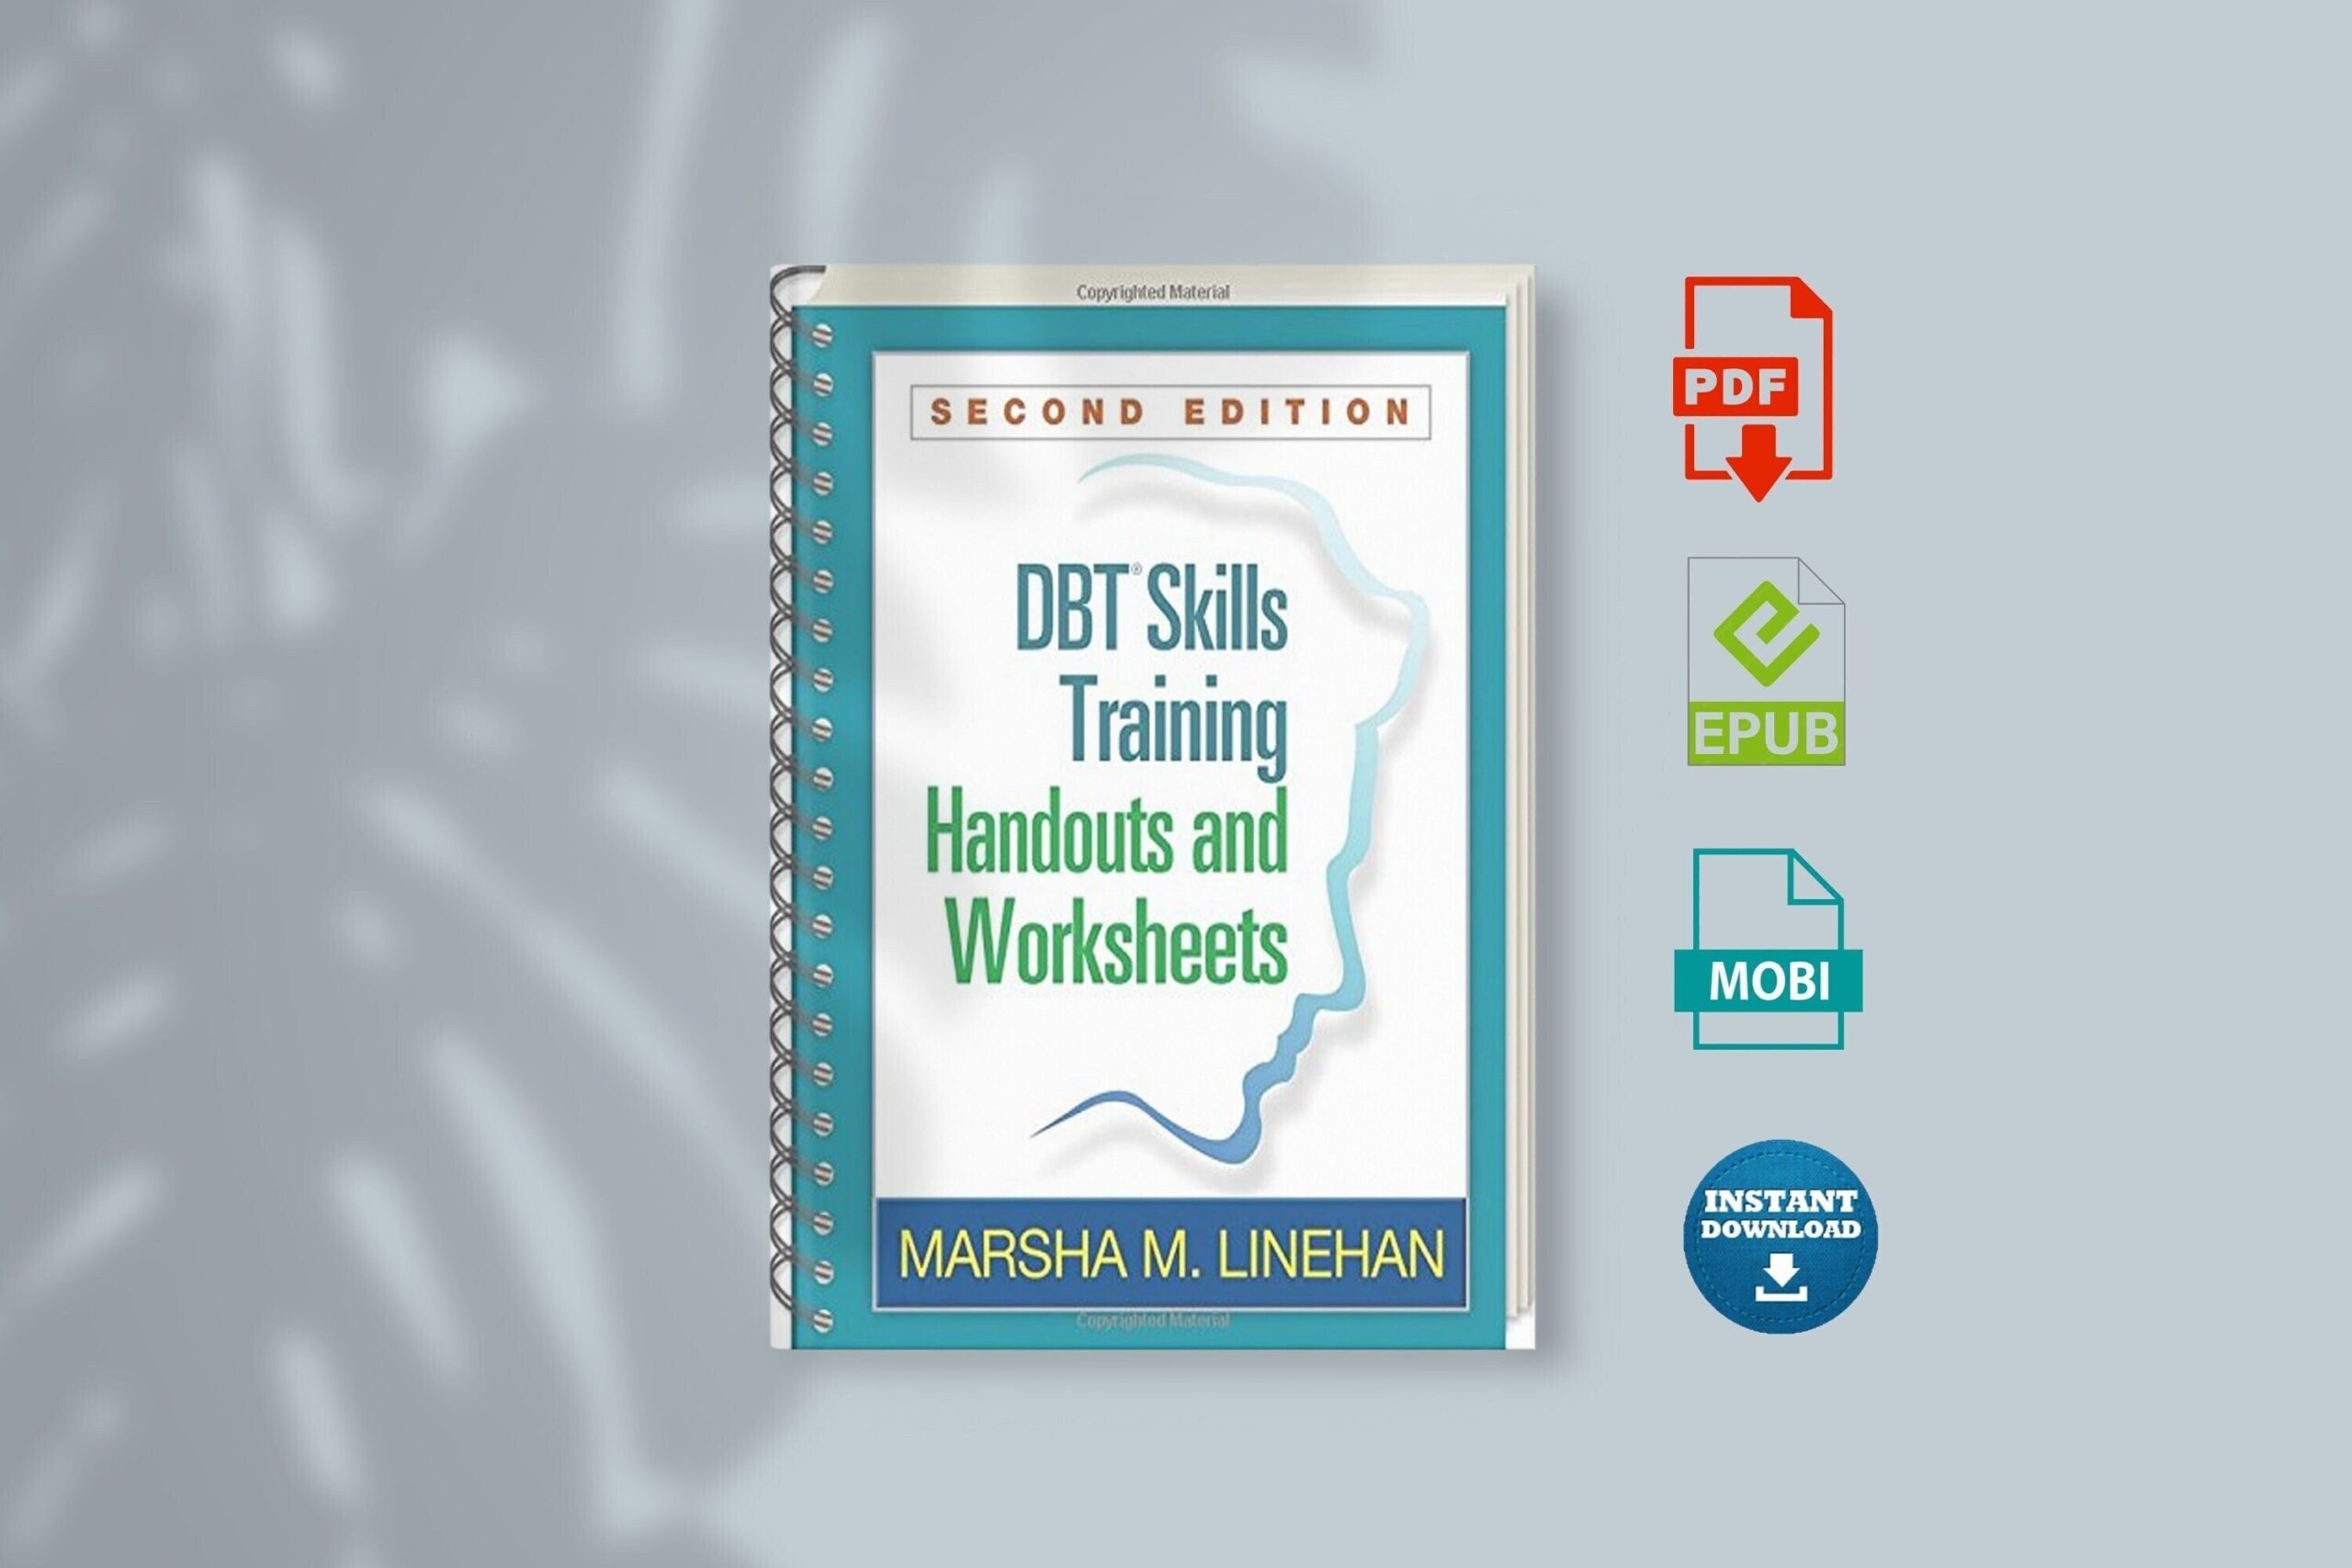 Dbt Skills Training Handouts And Worksheets Second Edition Etsy